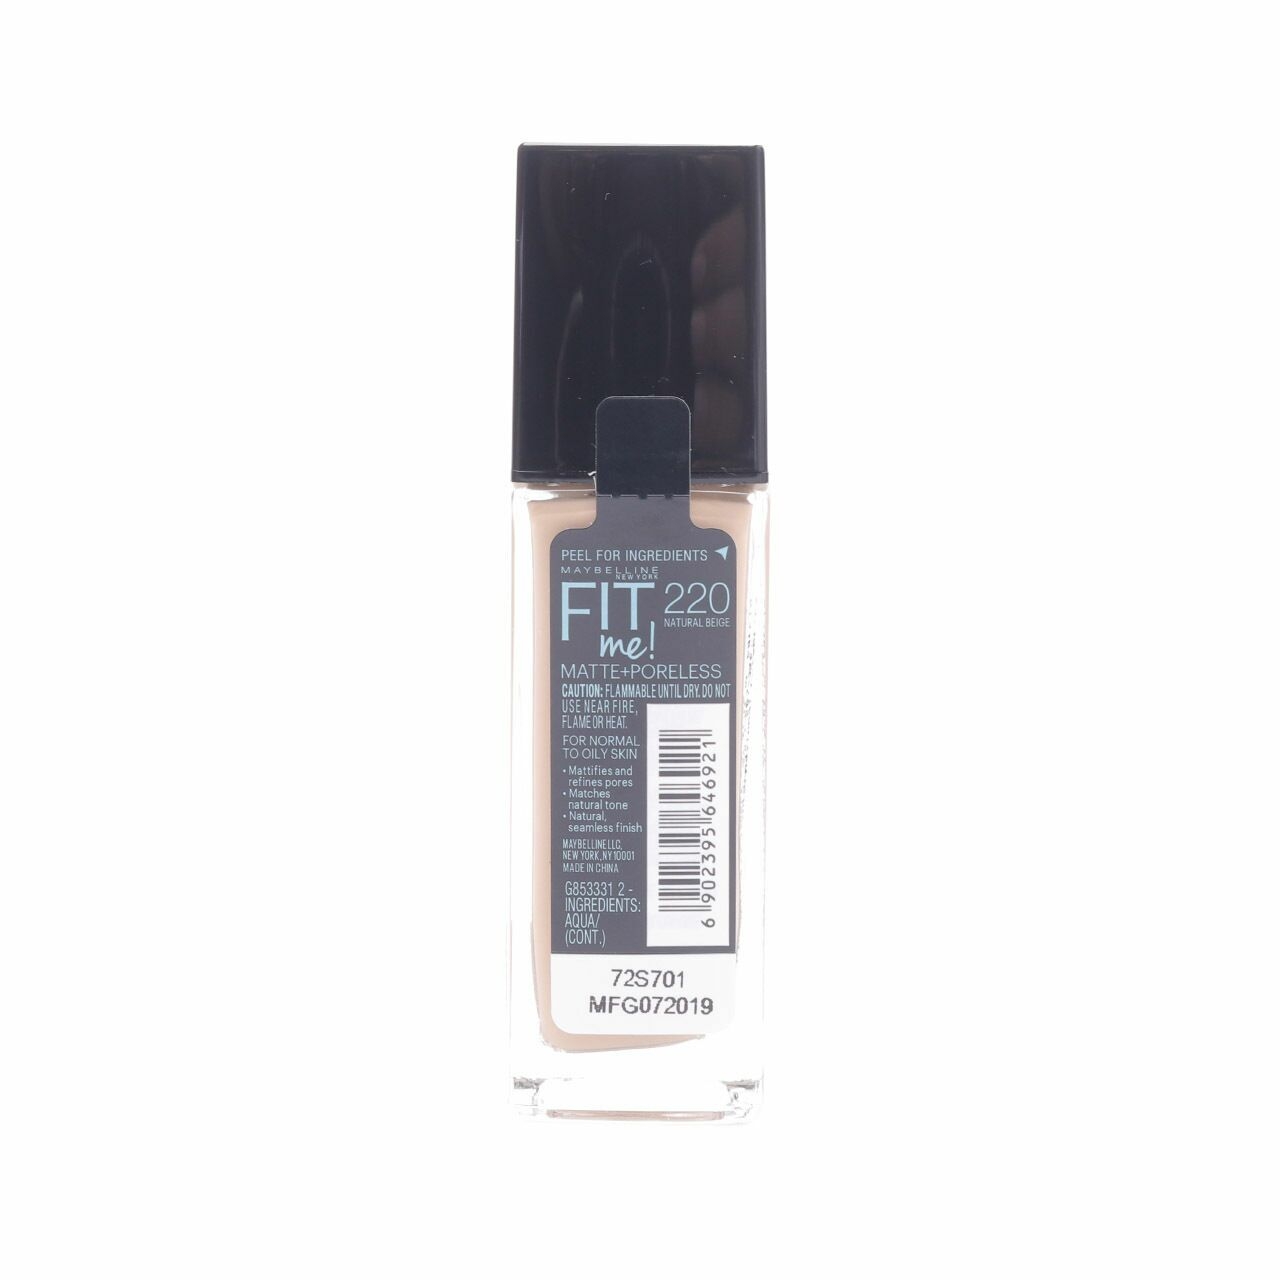 Maybelline Matte + Poreless Fit Me Foundation Normal to Oily 220 Natural Beige Faces